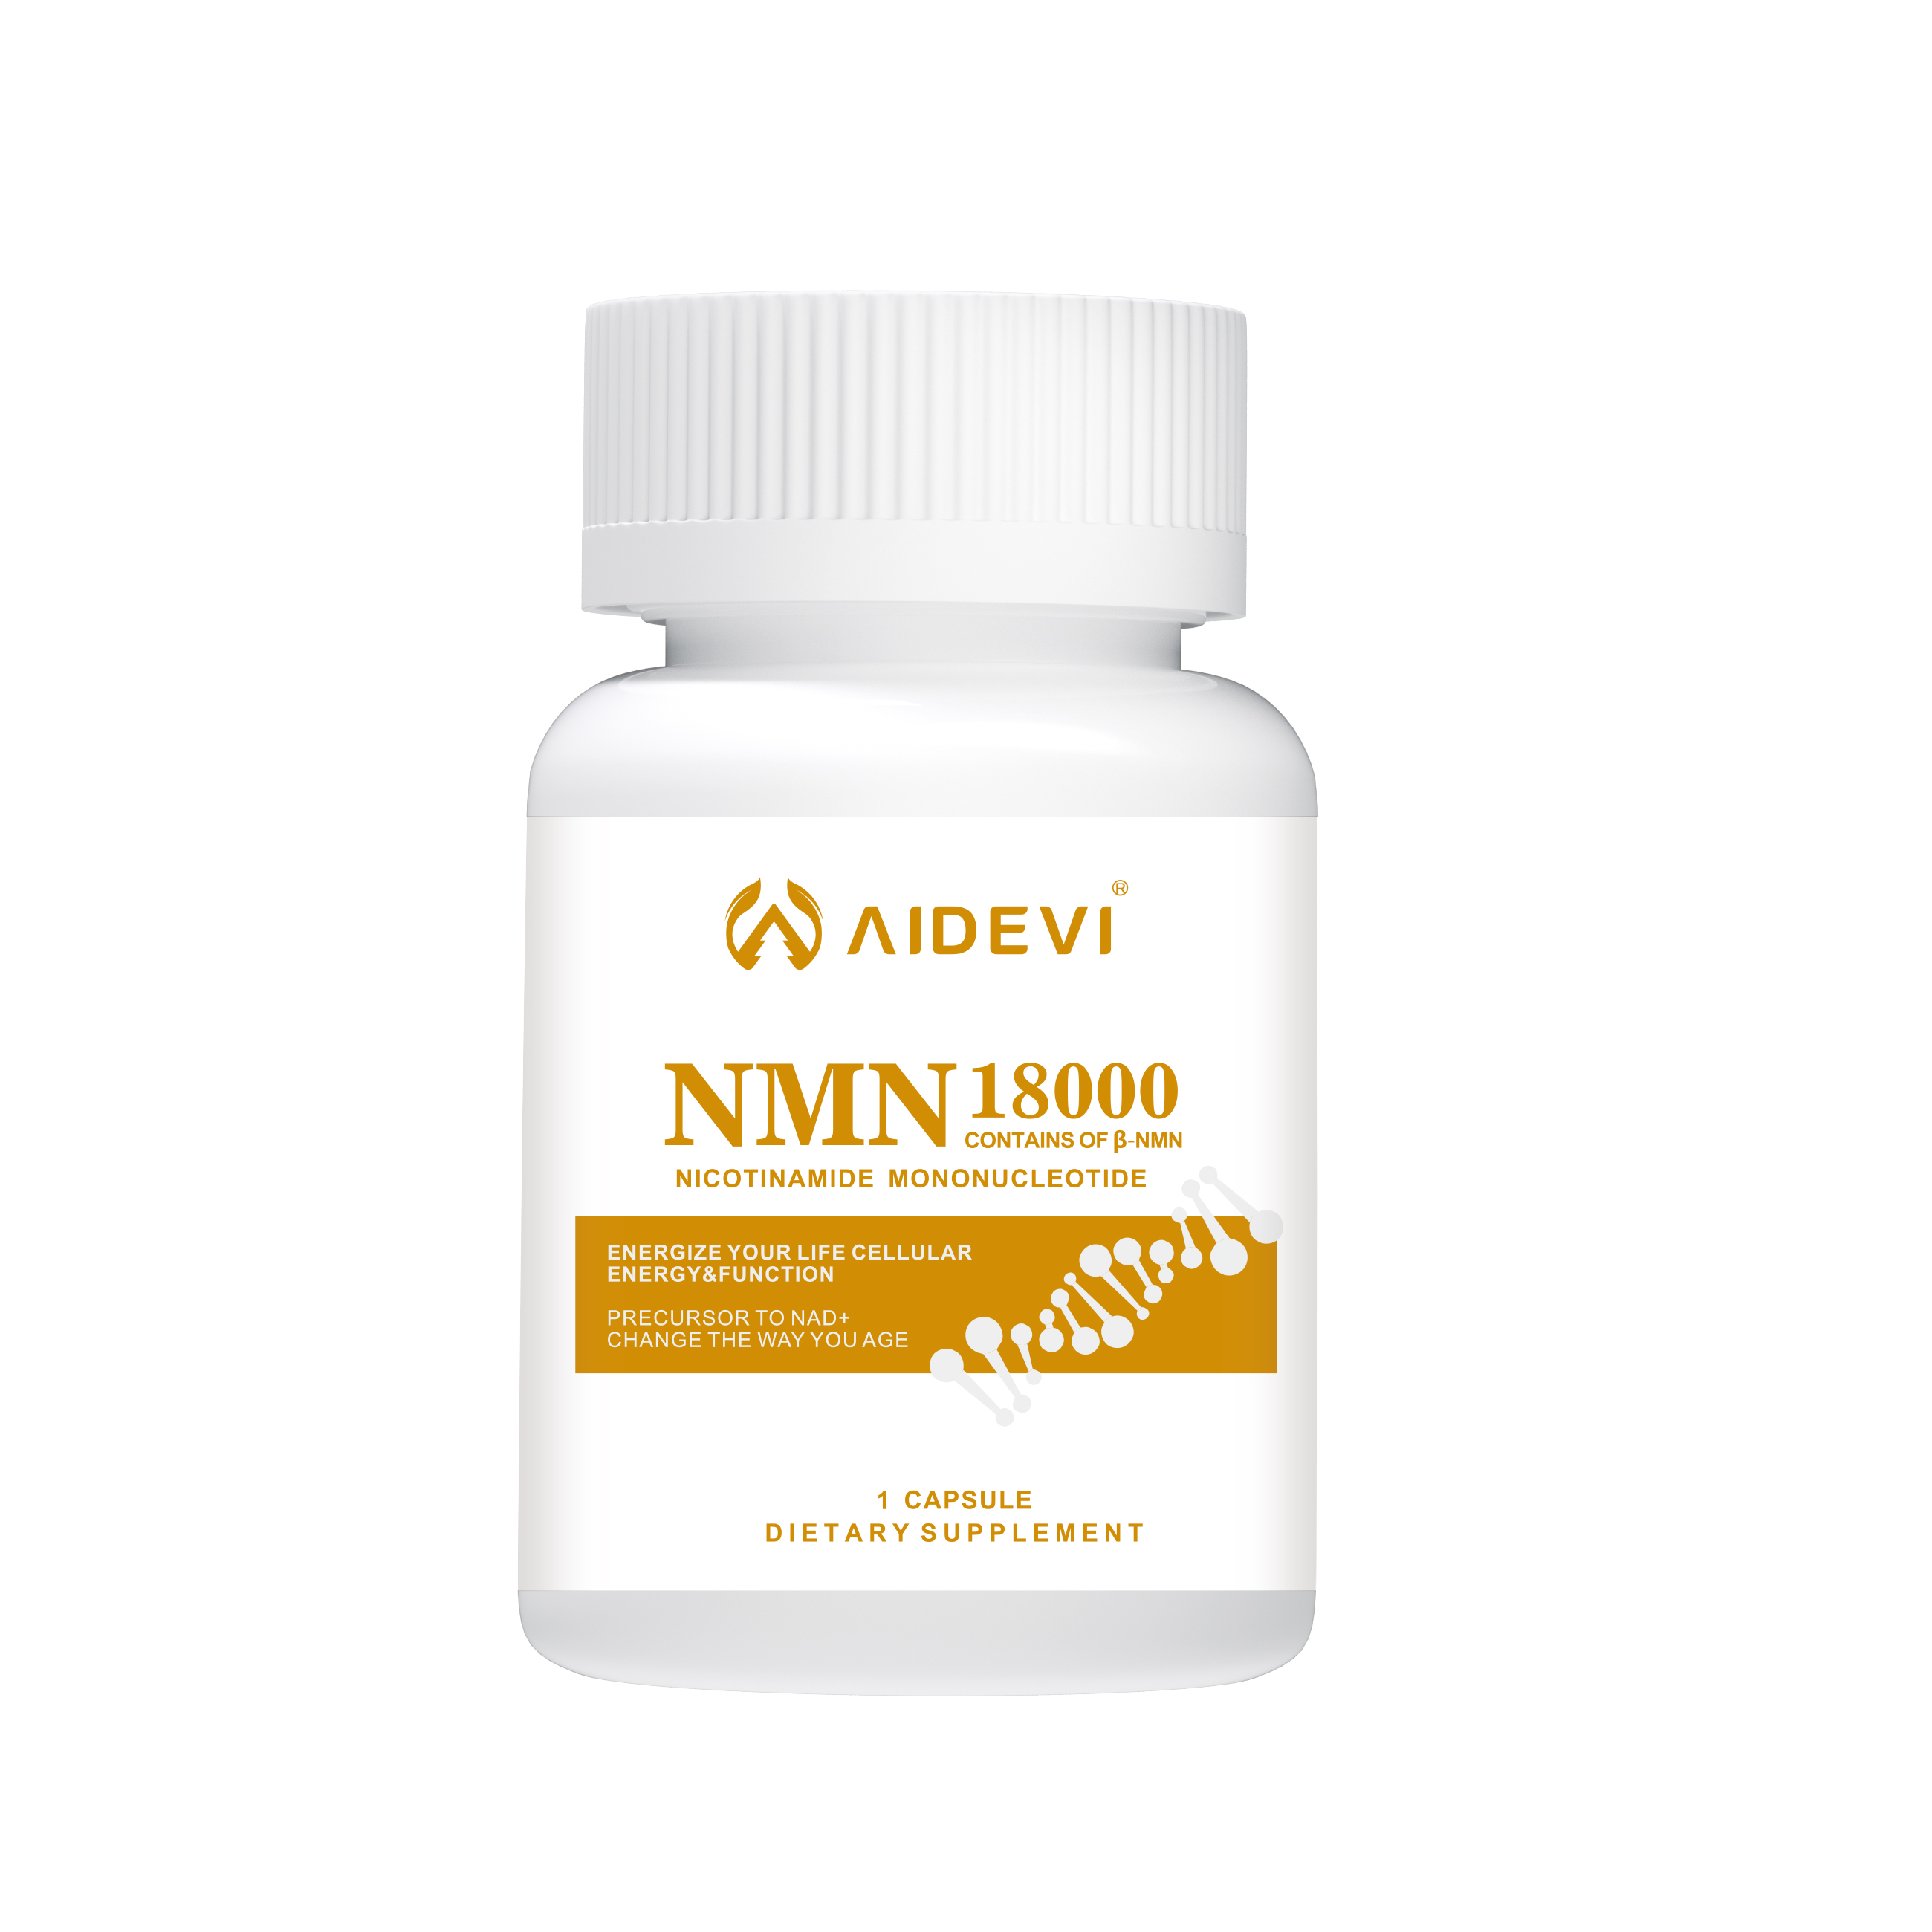 AIDEVI NMN18000 300MG NMN β-Nicotinamide Mononucleotide 60PCS CAPSULE (SET OF 10) DIETARY SUPPLEMENT MADE IN USA